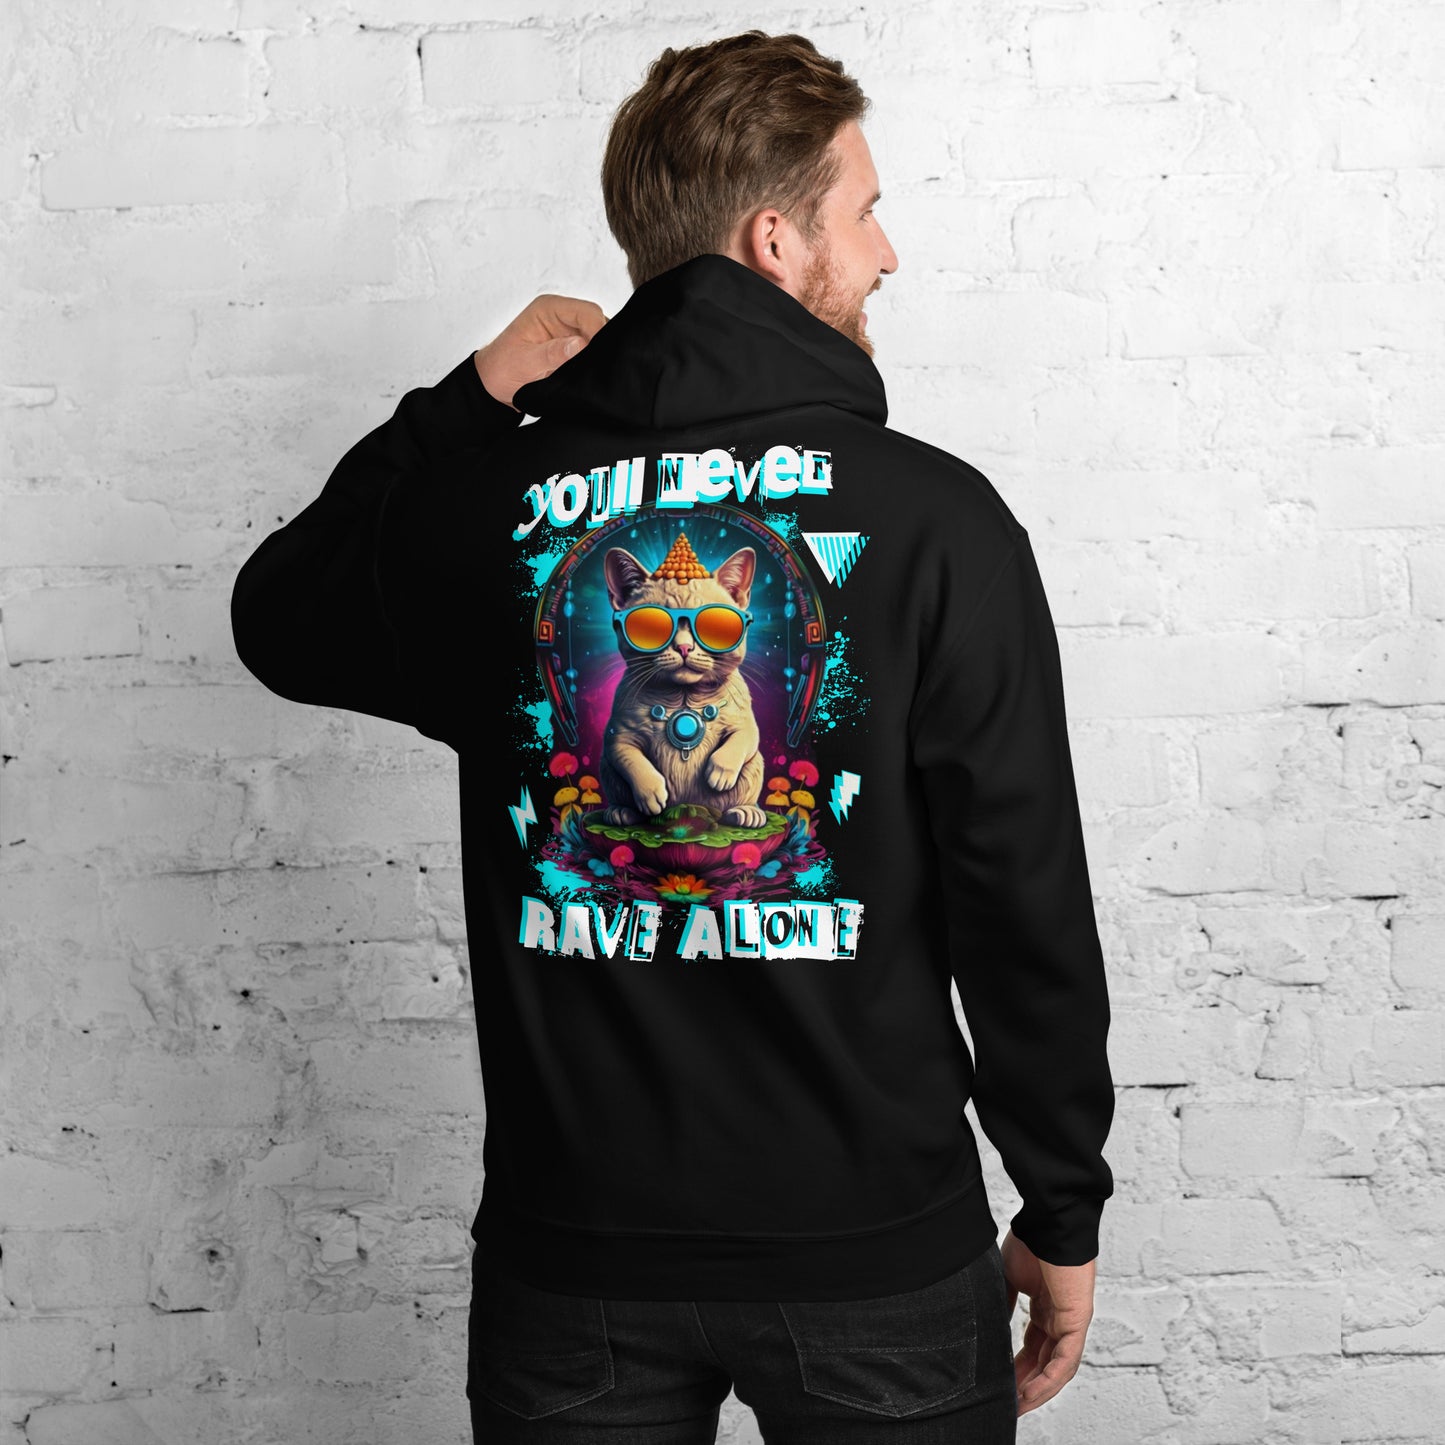 You'll never rave alone - Unisex Hoodie